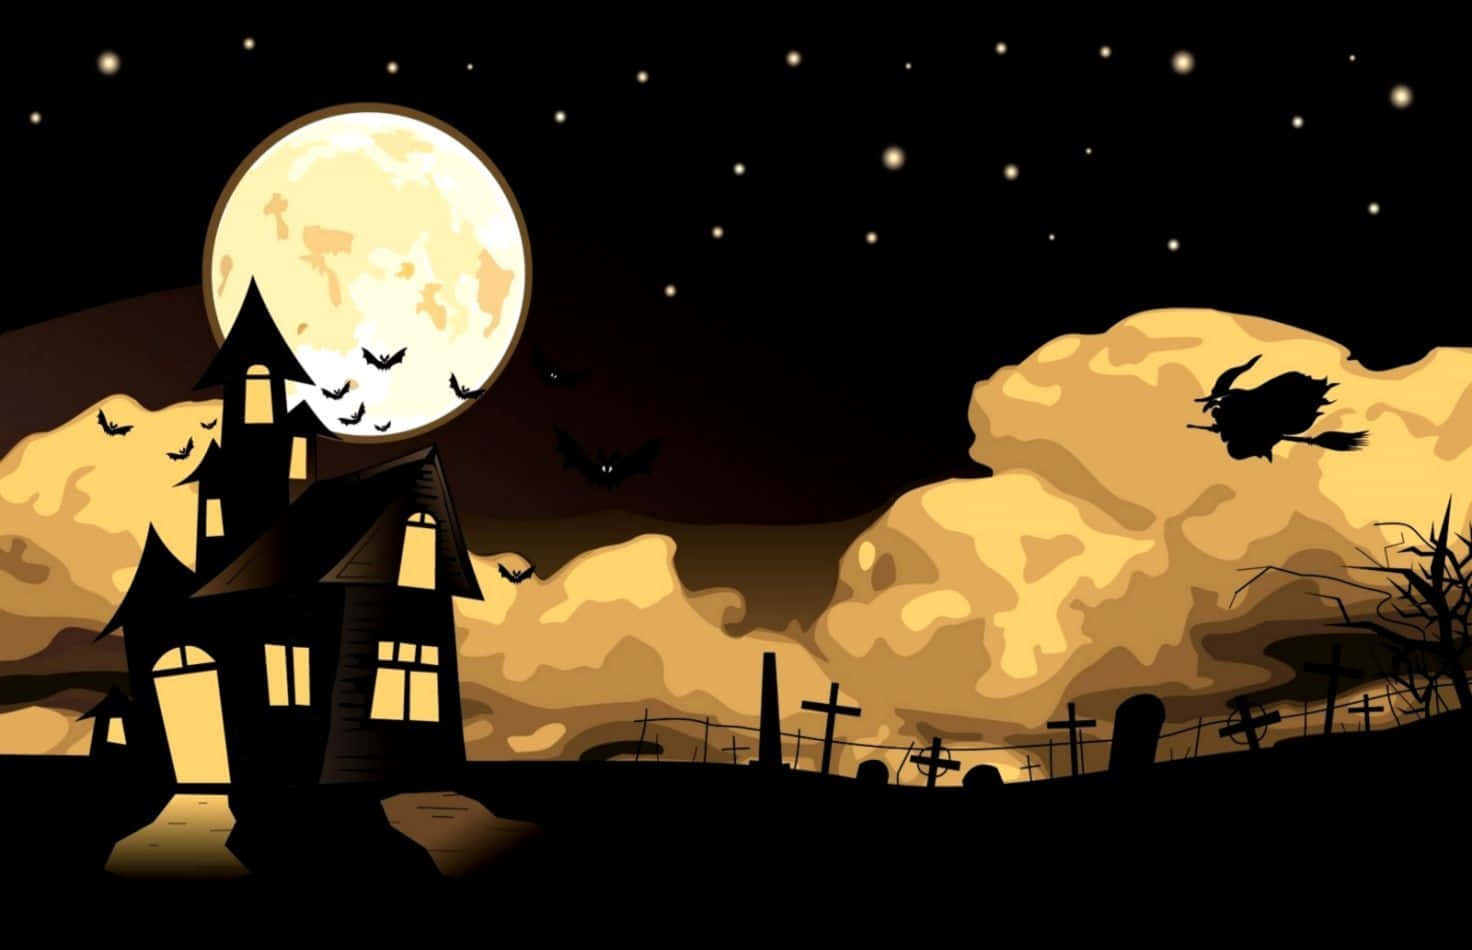 Halloween Cute Full Moon Witch Castle Picture